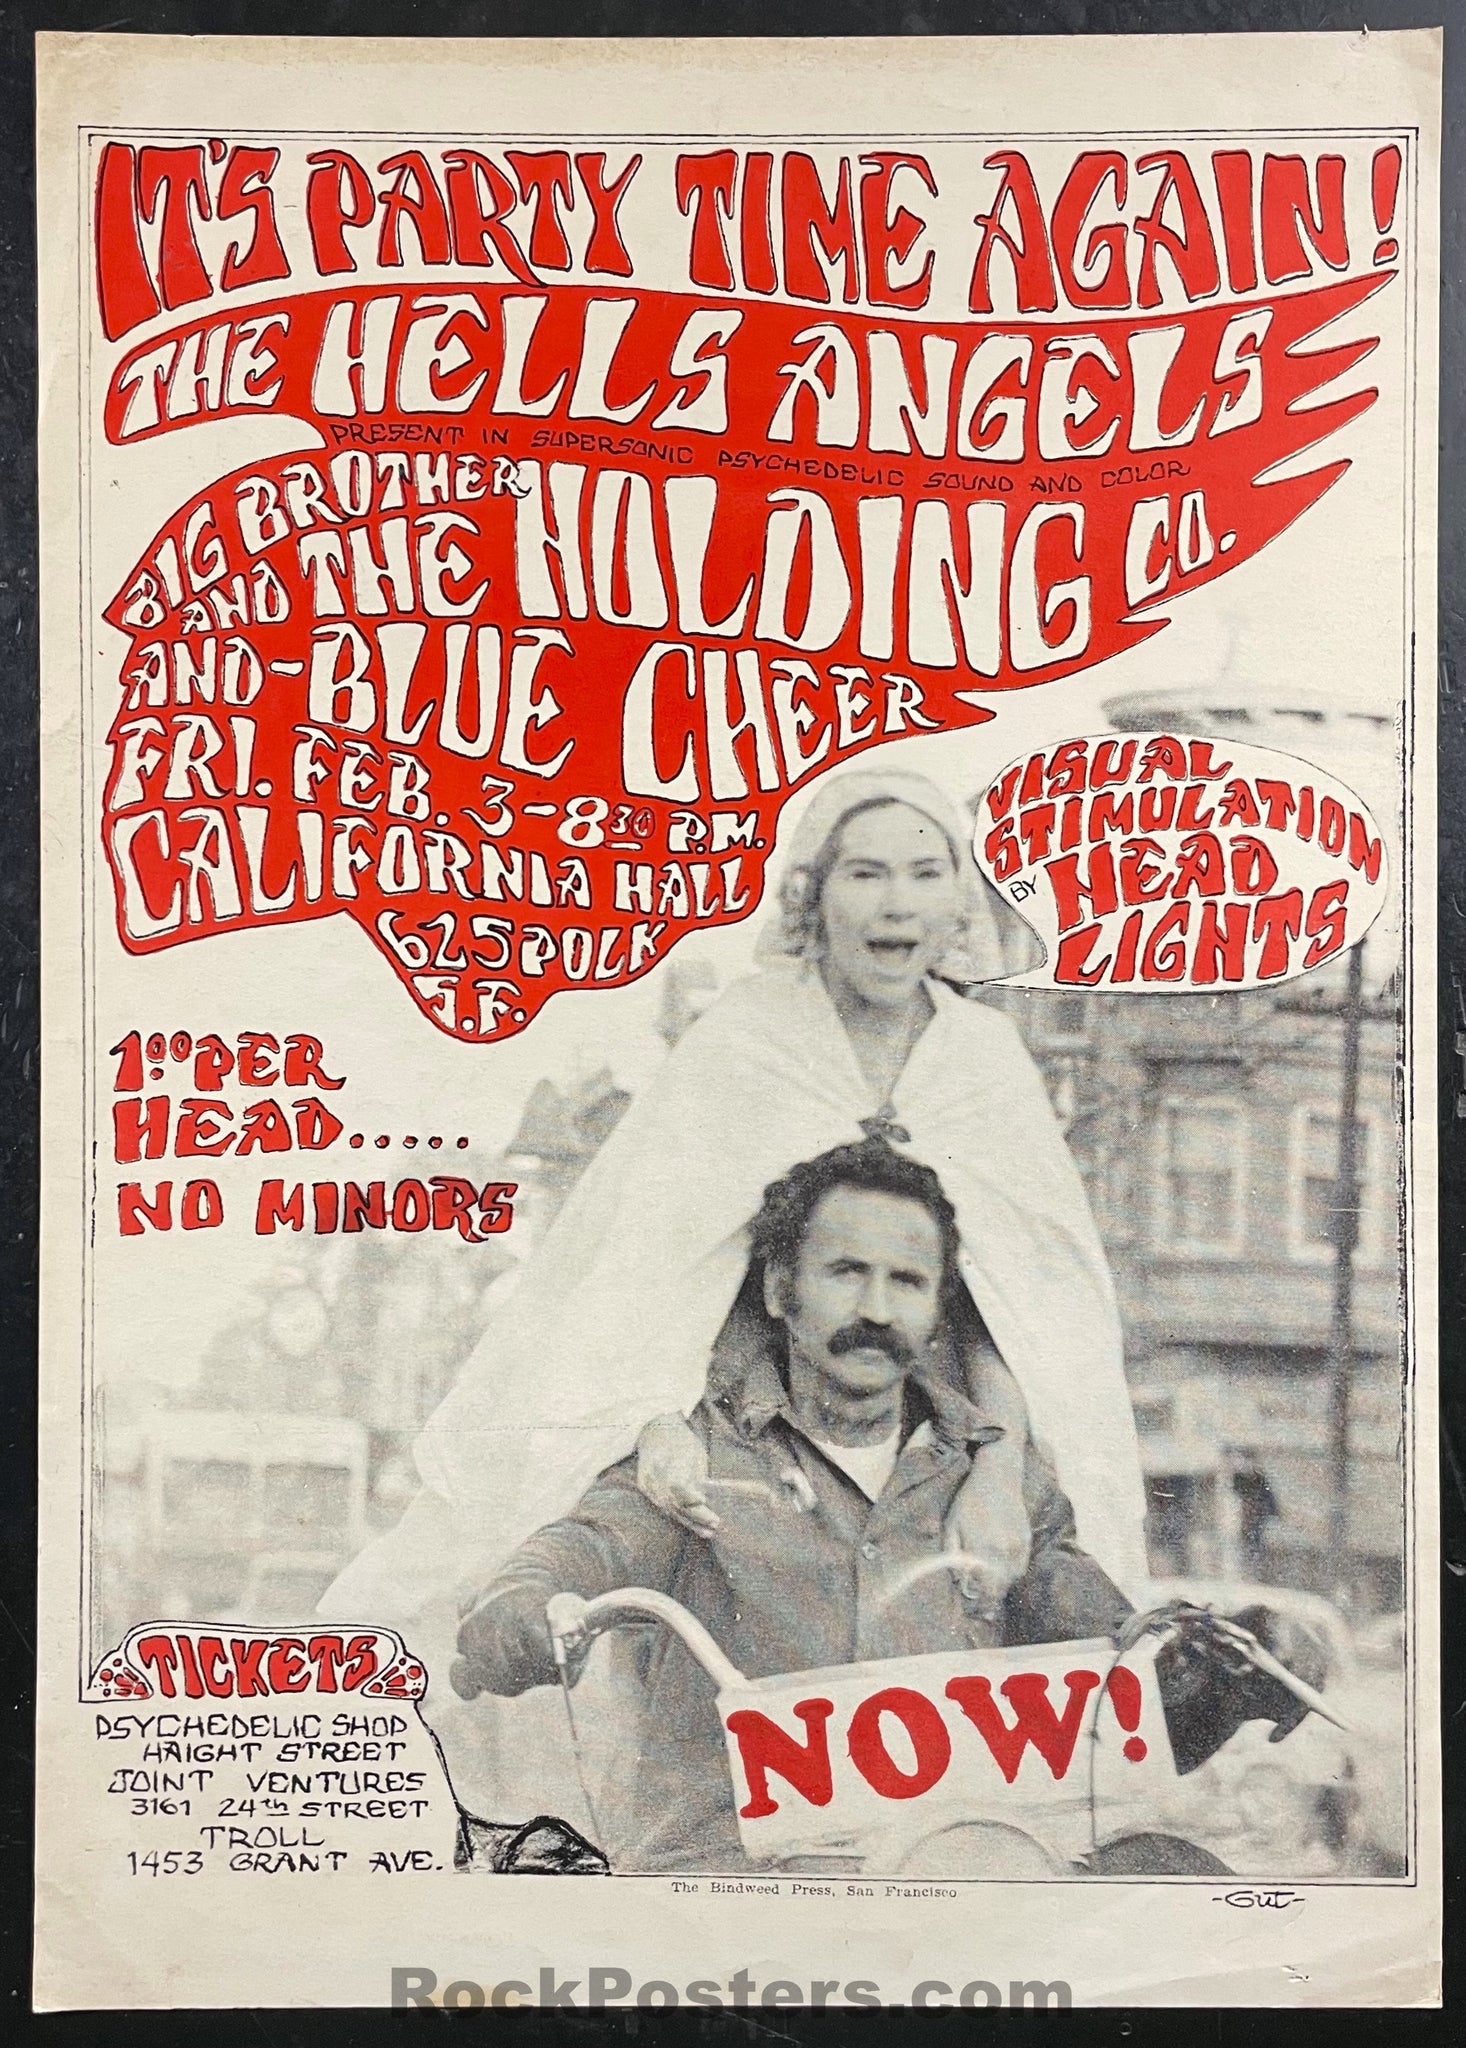 AUCTION - AOR 2.248 - Hells Angels - Janis Joplin Big Brother - California Hall -  1967 Poster - Excellent